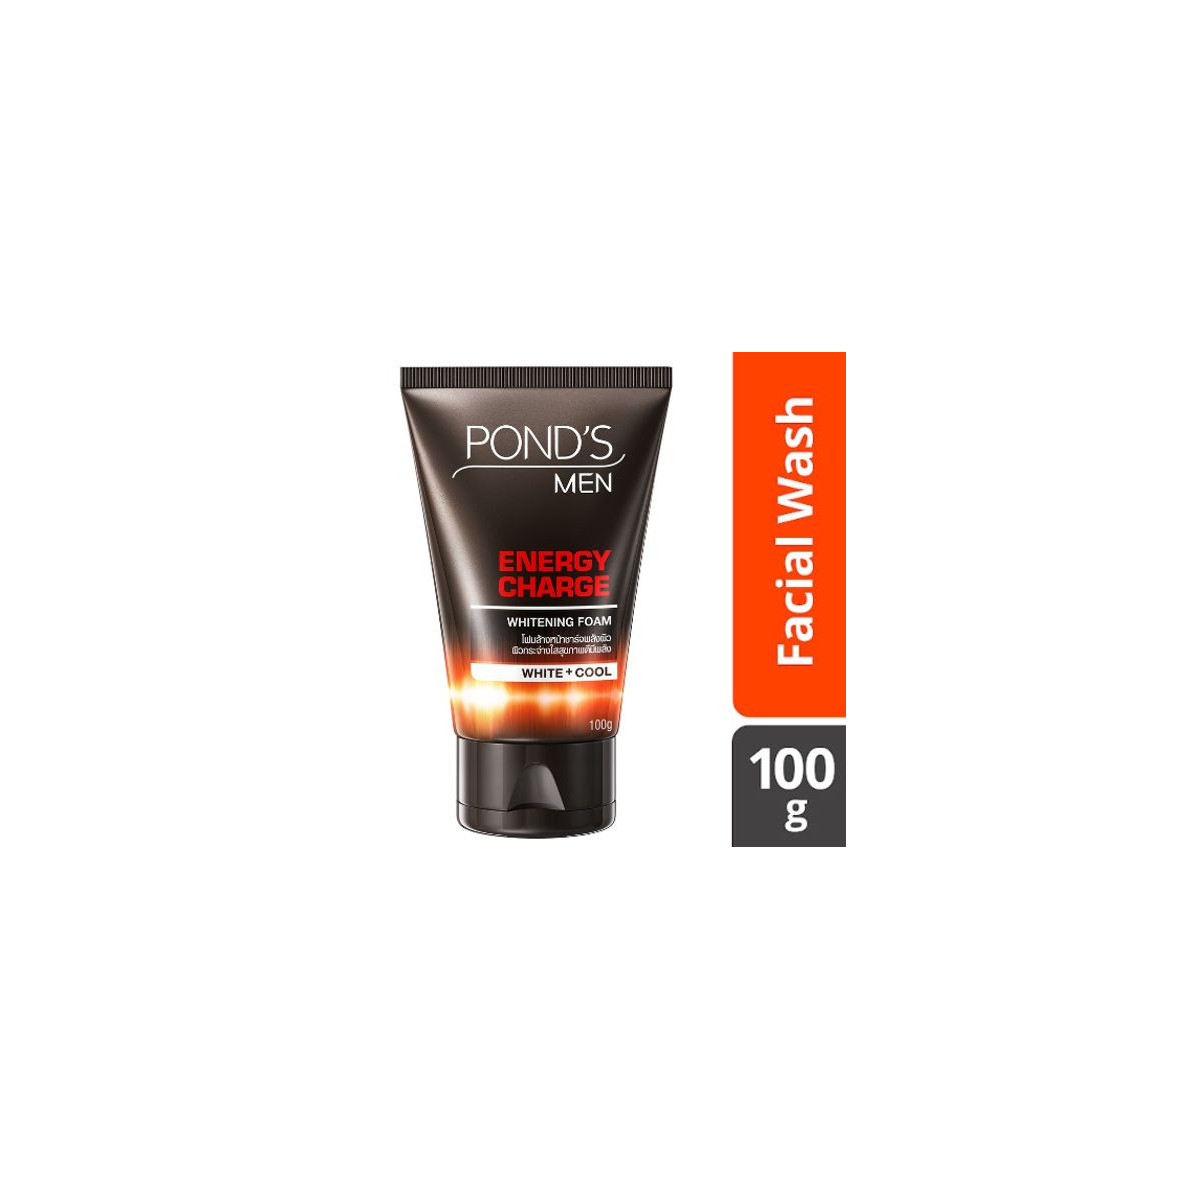 Pond's Men Facial Wash Energy Charge 100G